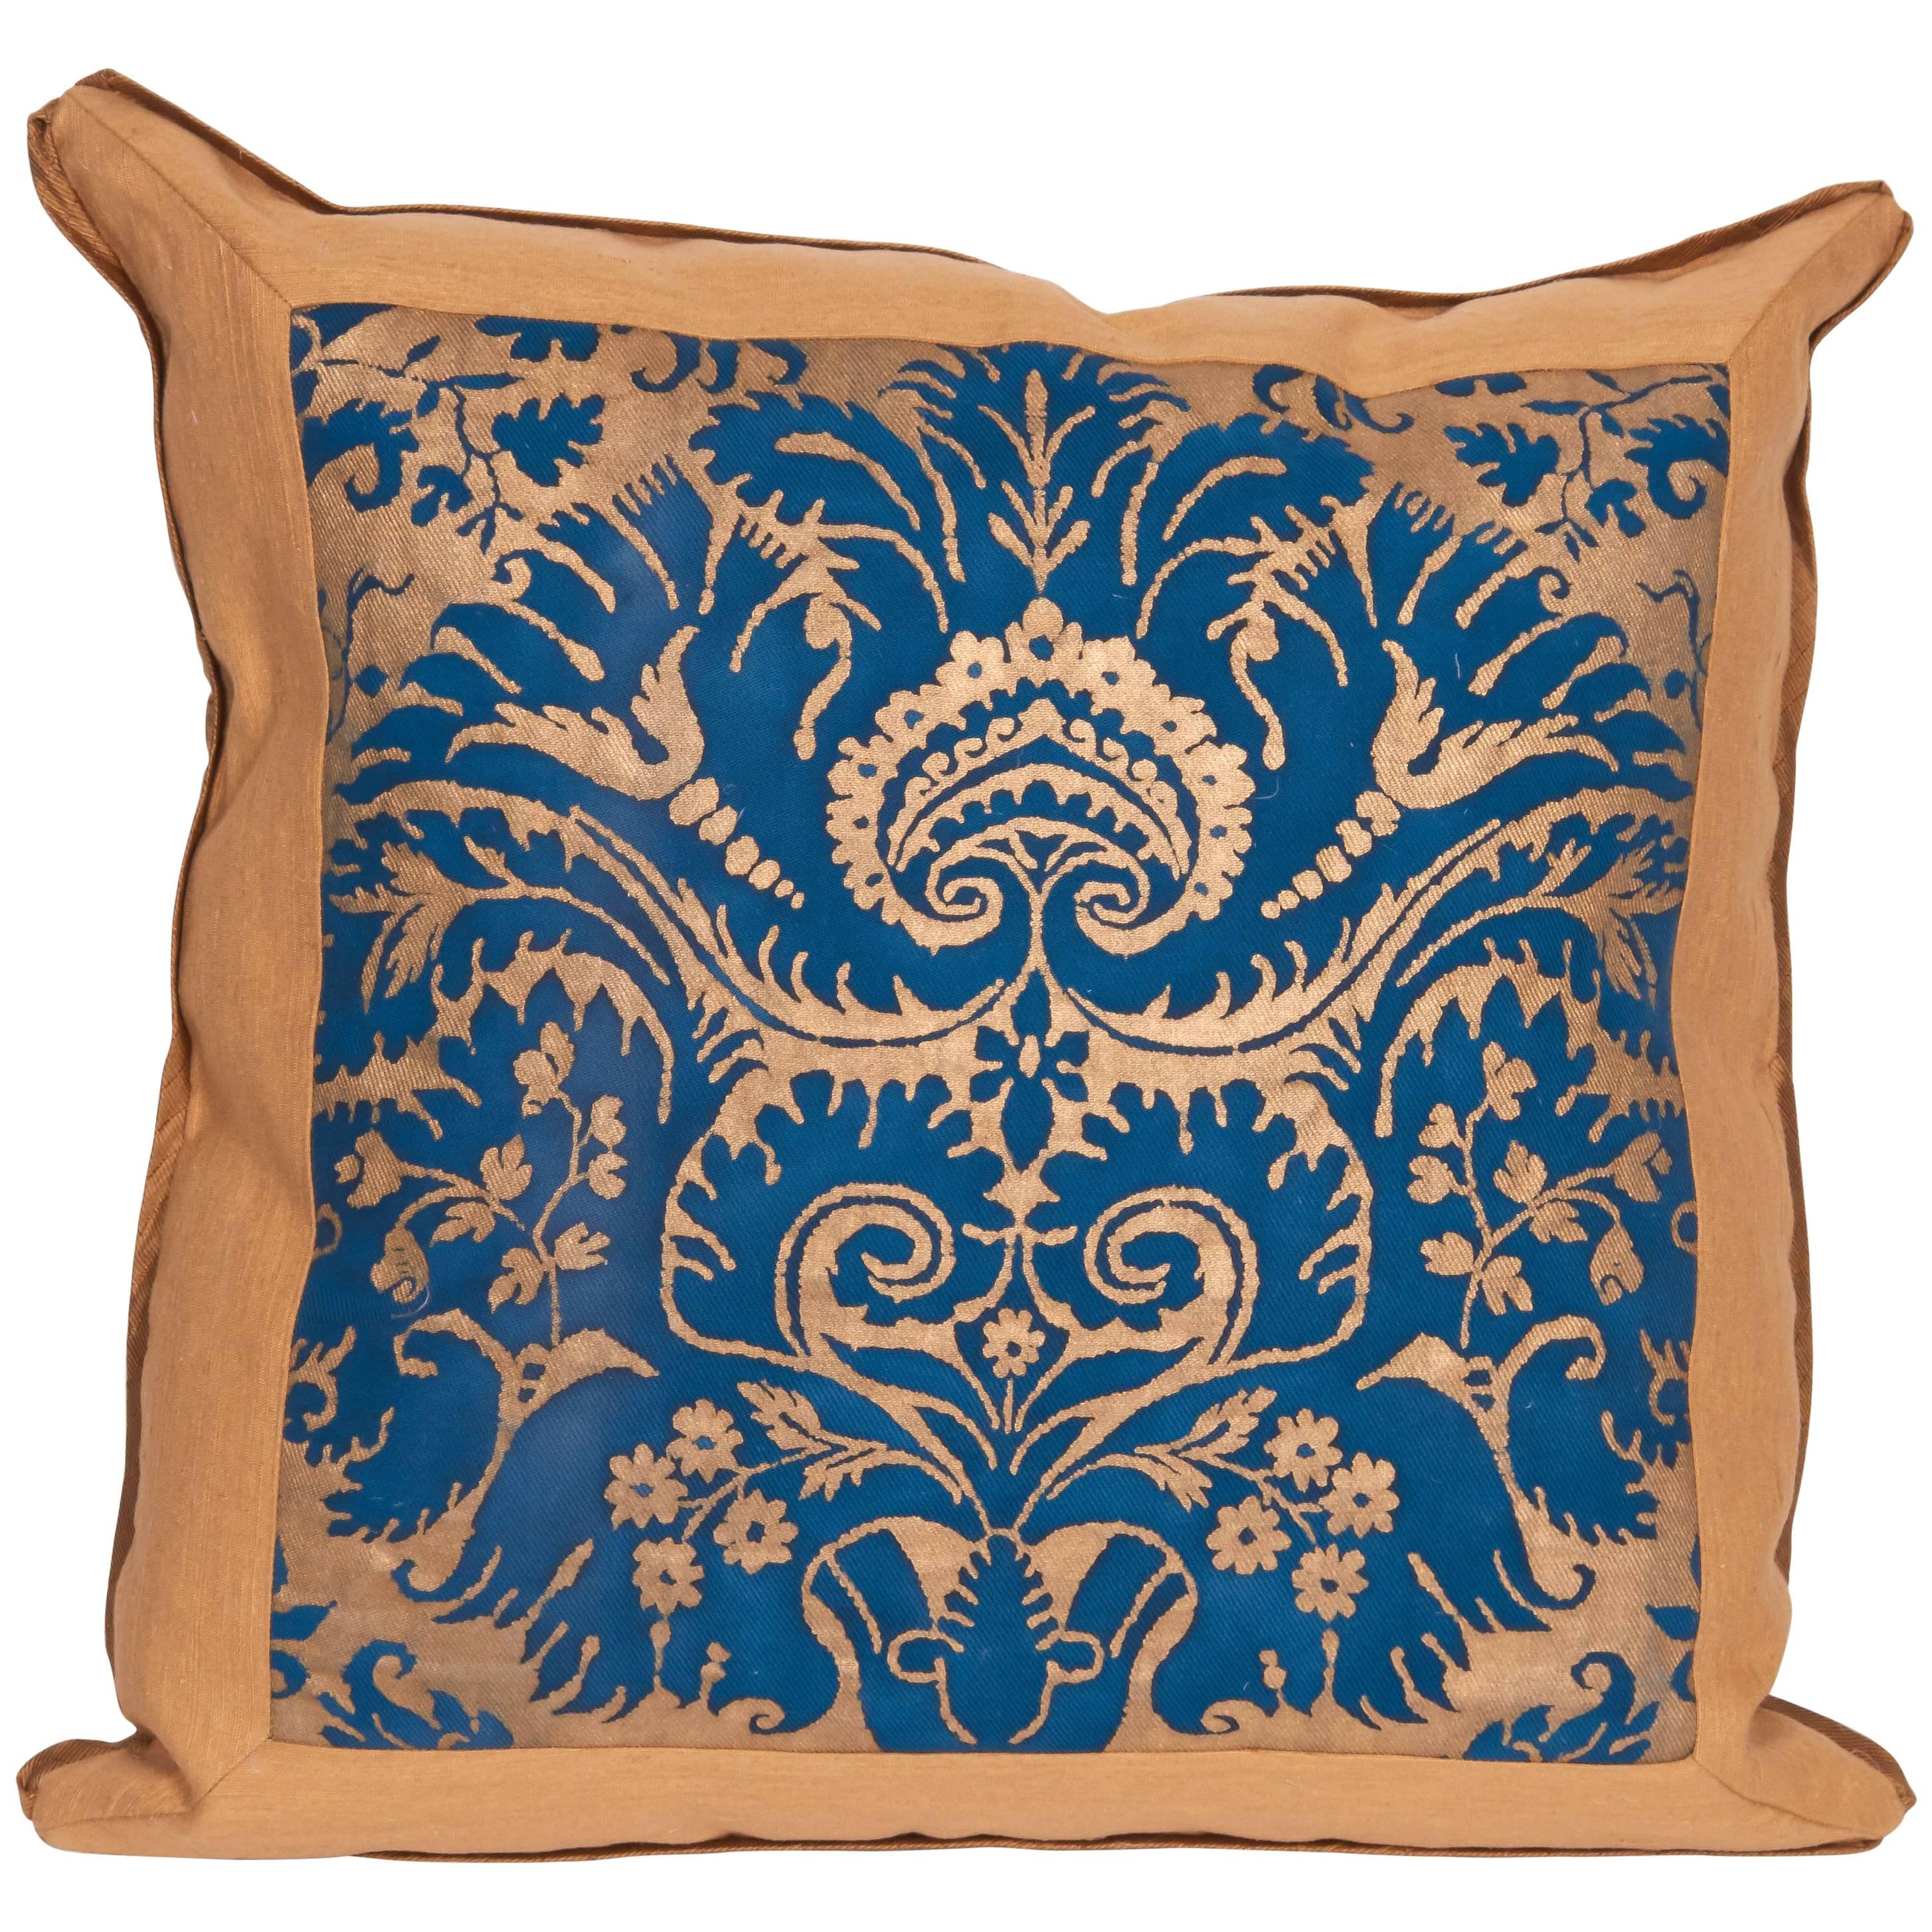 A Mitered Fortuny Fabric Cushion in the DeMedici Pattern